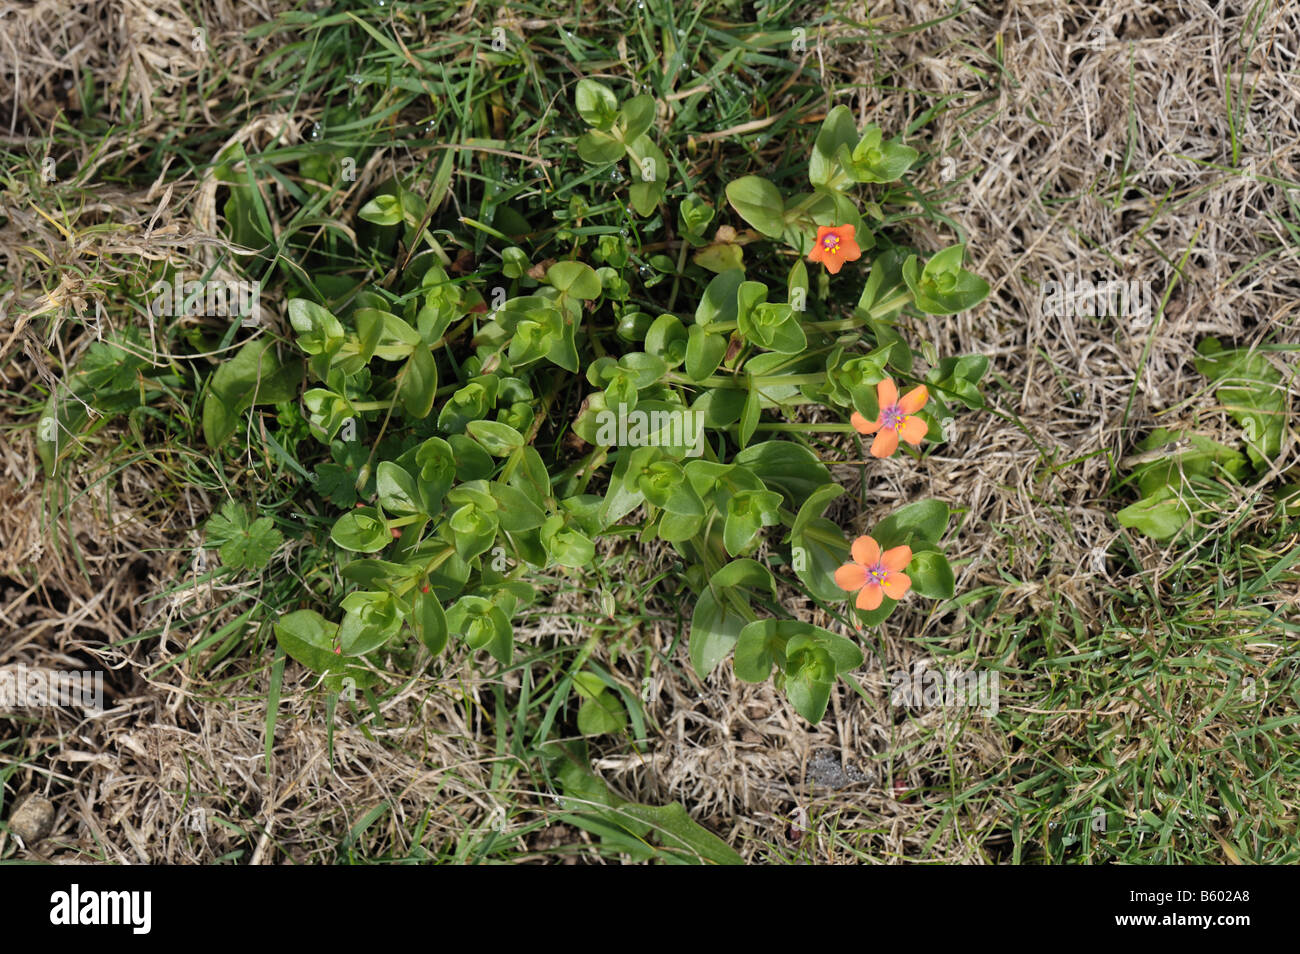 Scarlet pimpernel Anagallis arvensis prostrate flowering plant in dead grass near the sea Stock Photo